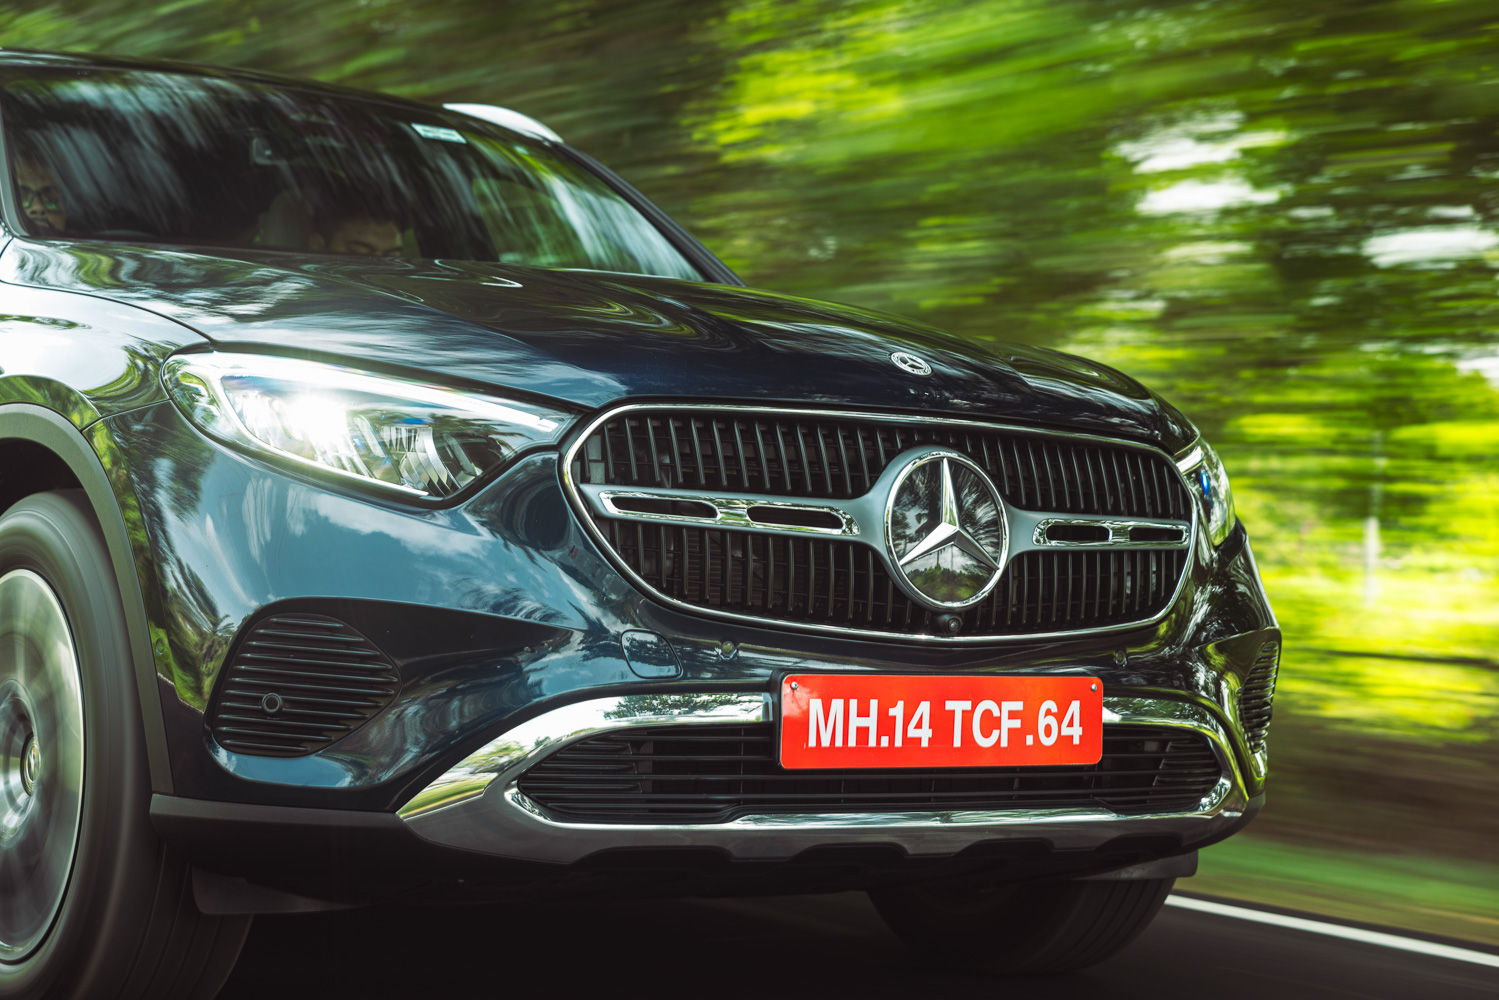 GLC 220d 4MATIC on road Price  Mercedes-Benz GLC 220d 4MATIC Features &  Specs